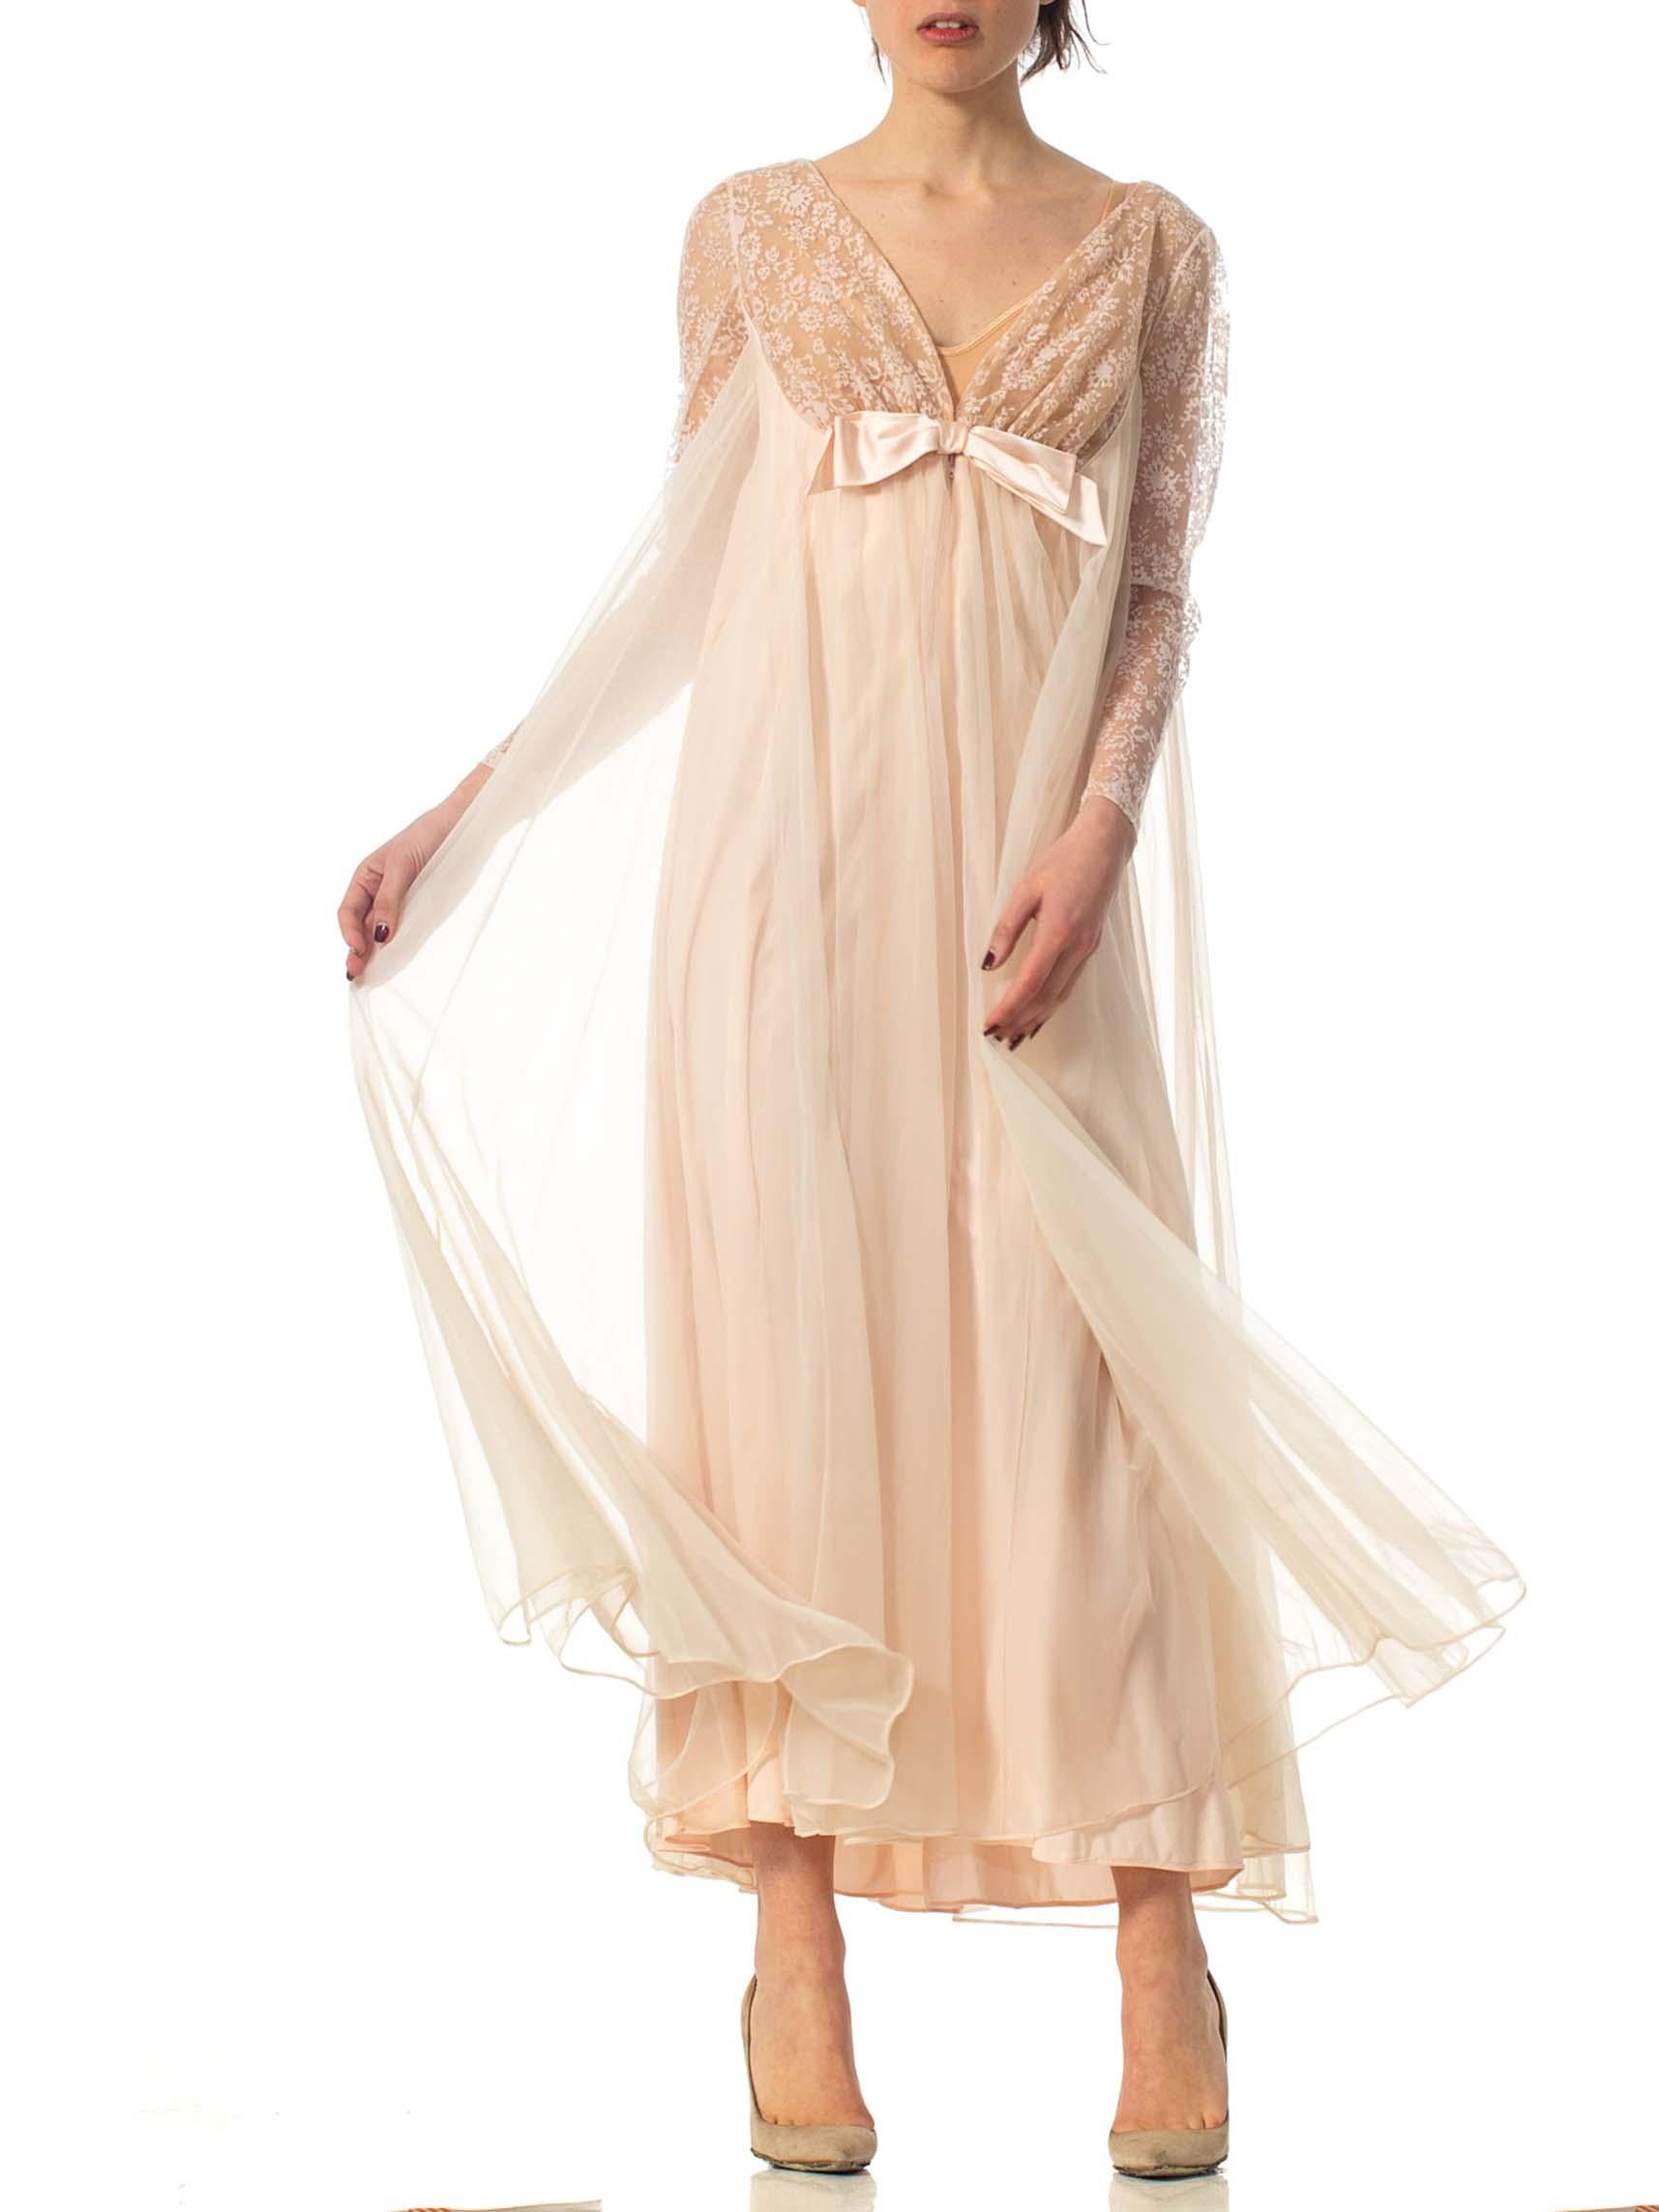 1960S Nude Nylon Chiffon Jersey Romantic Negligee House Dress With Sleeves For Sale 1